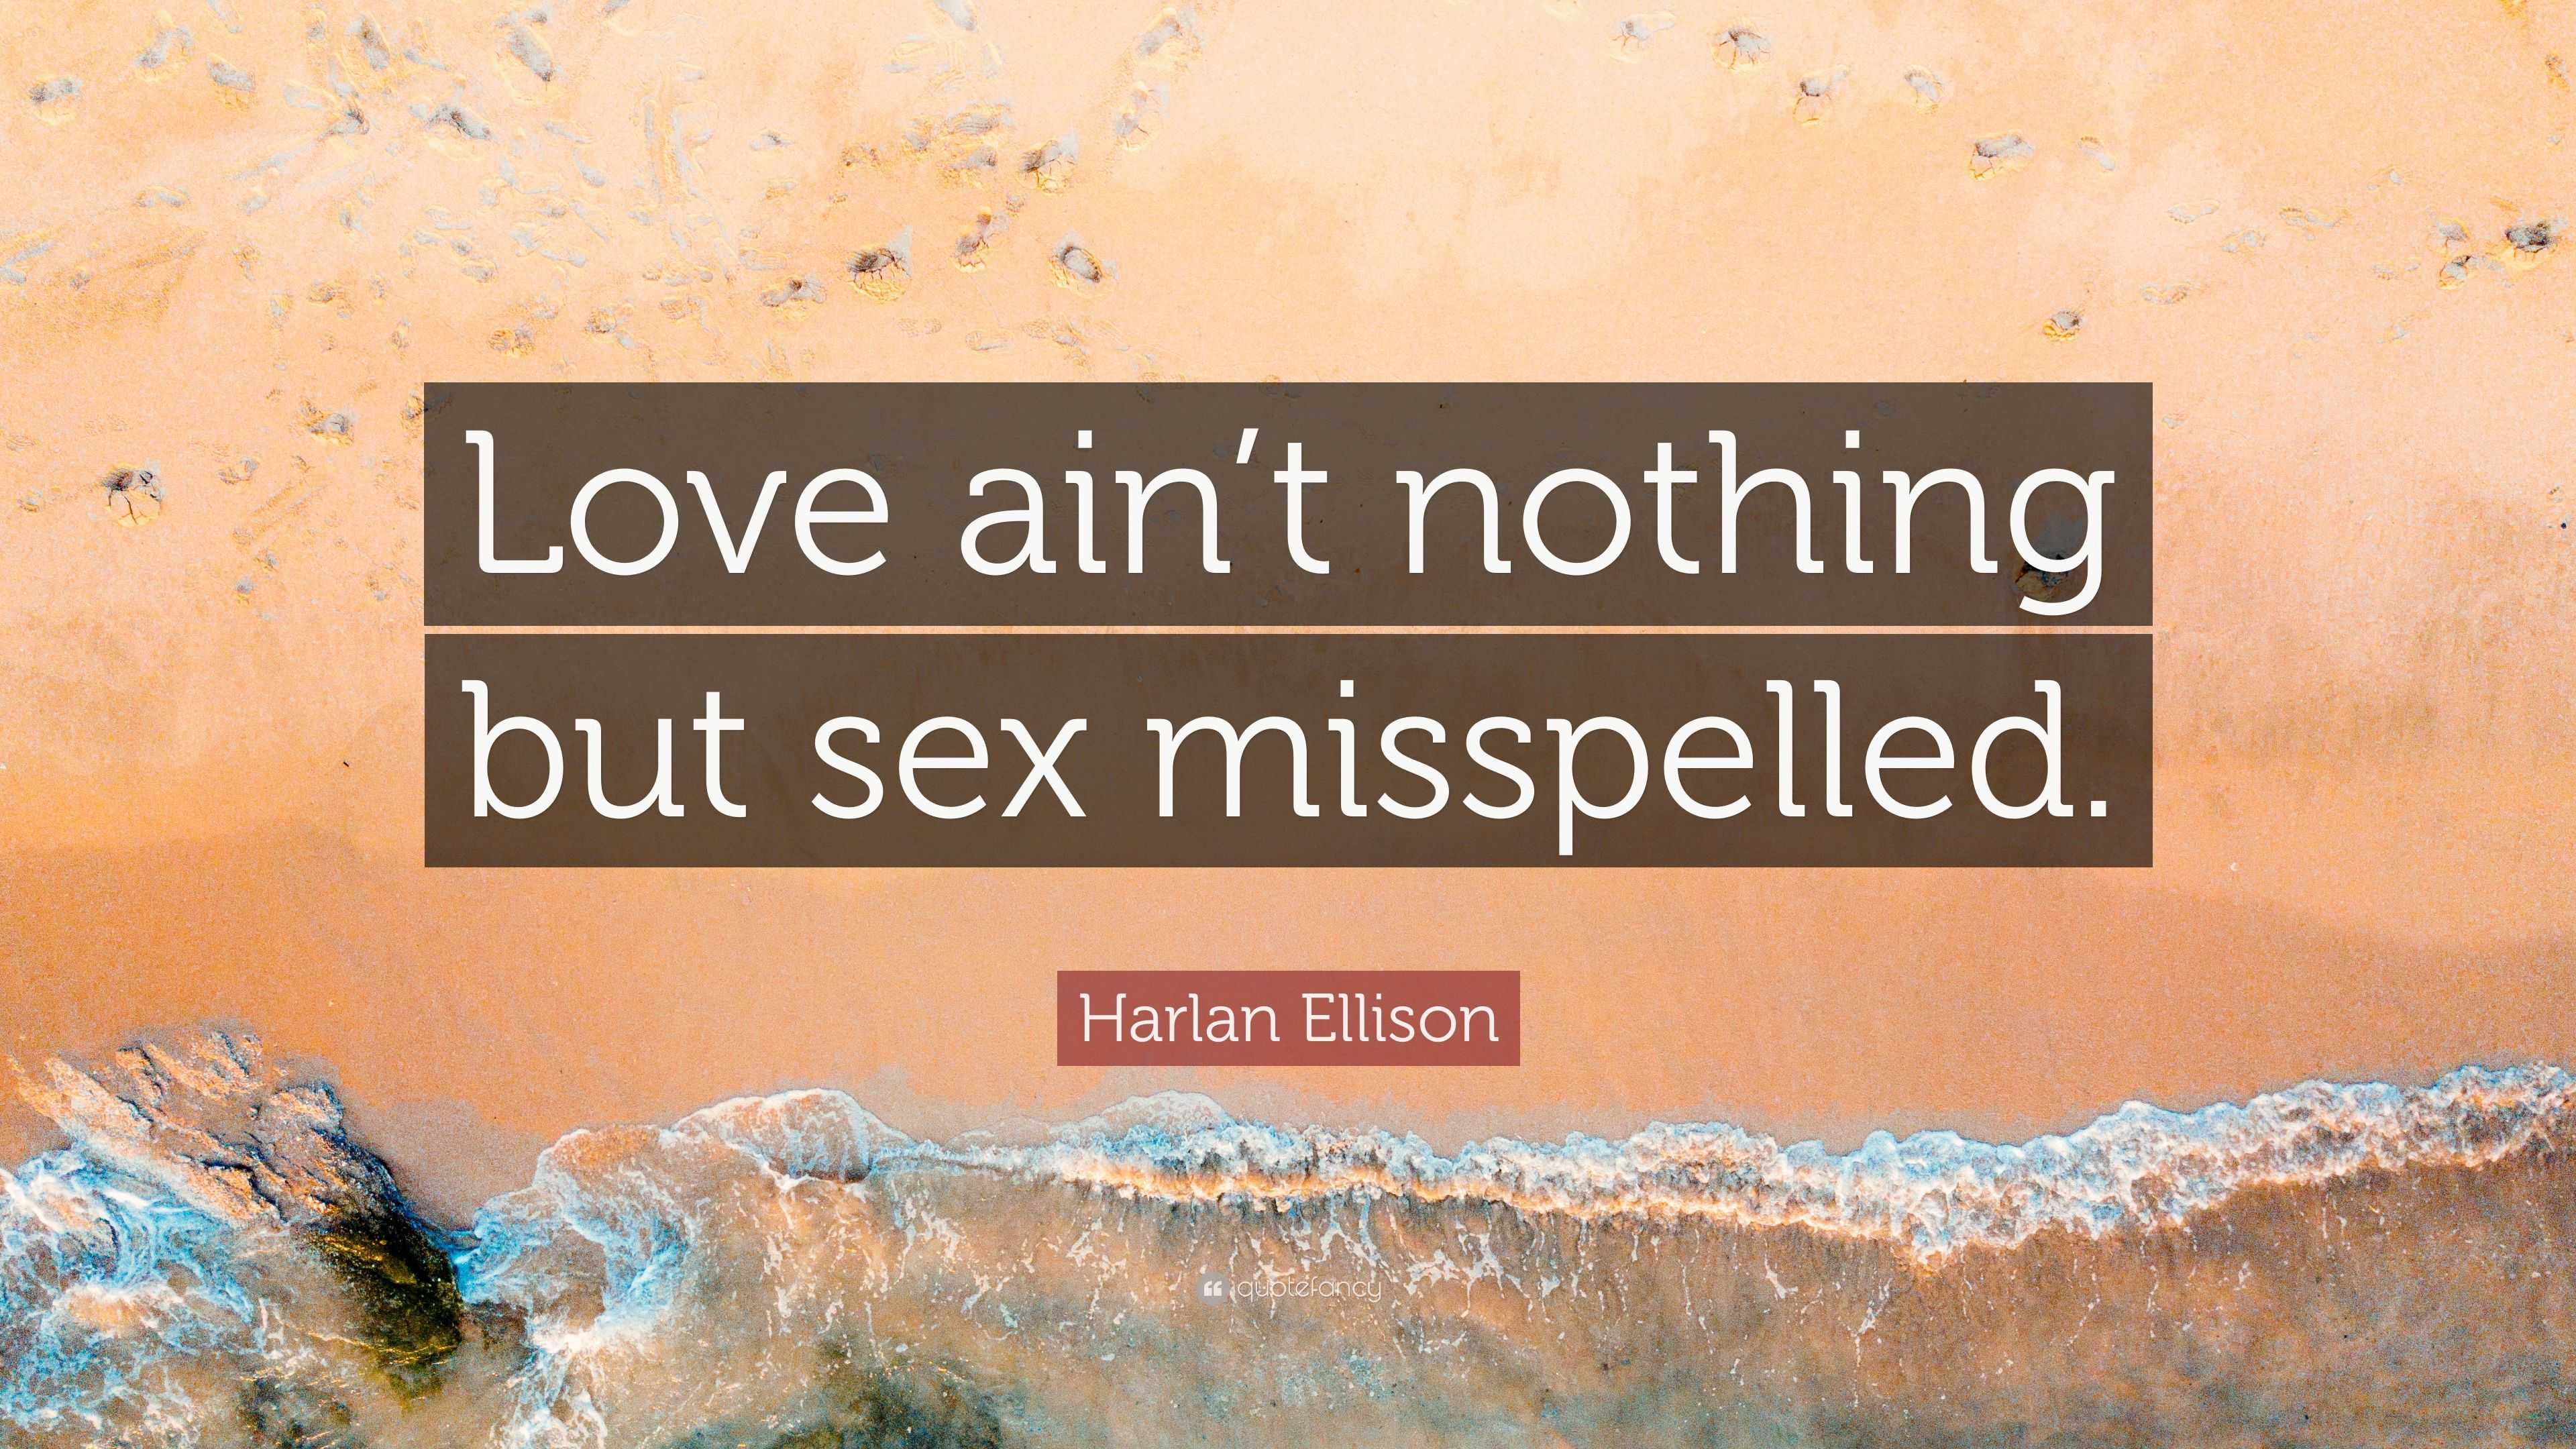 Is love nothing but sex?